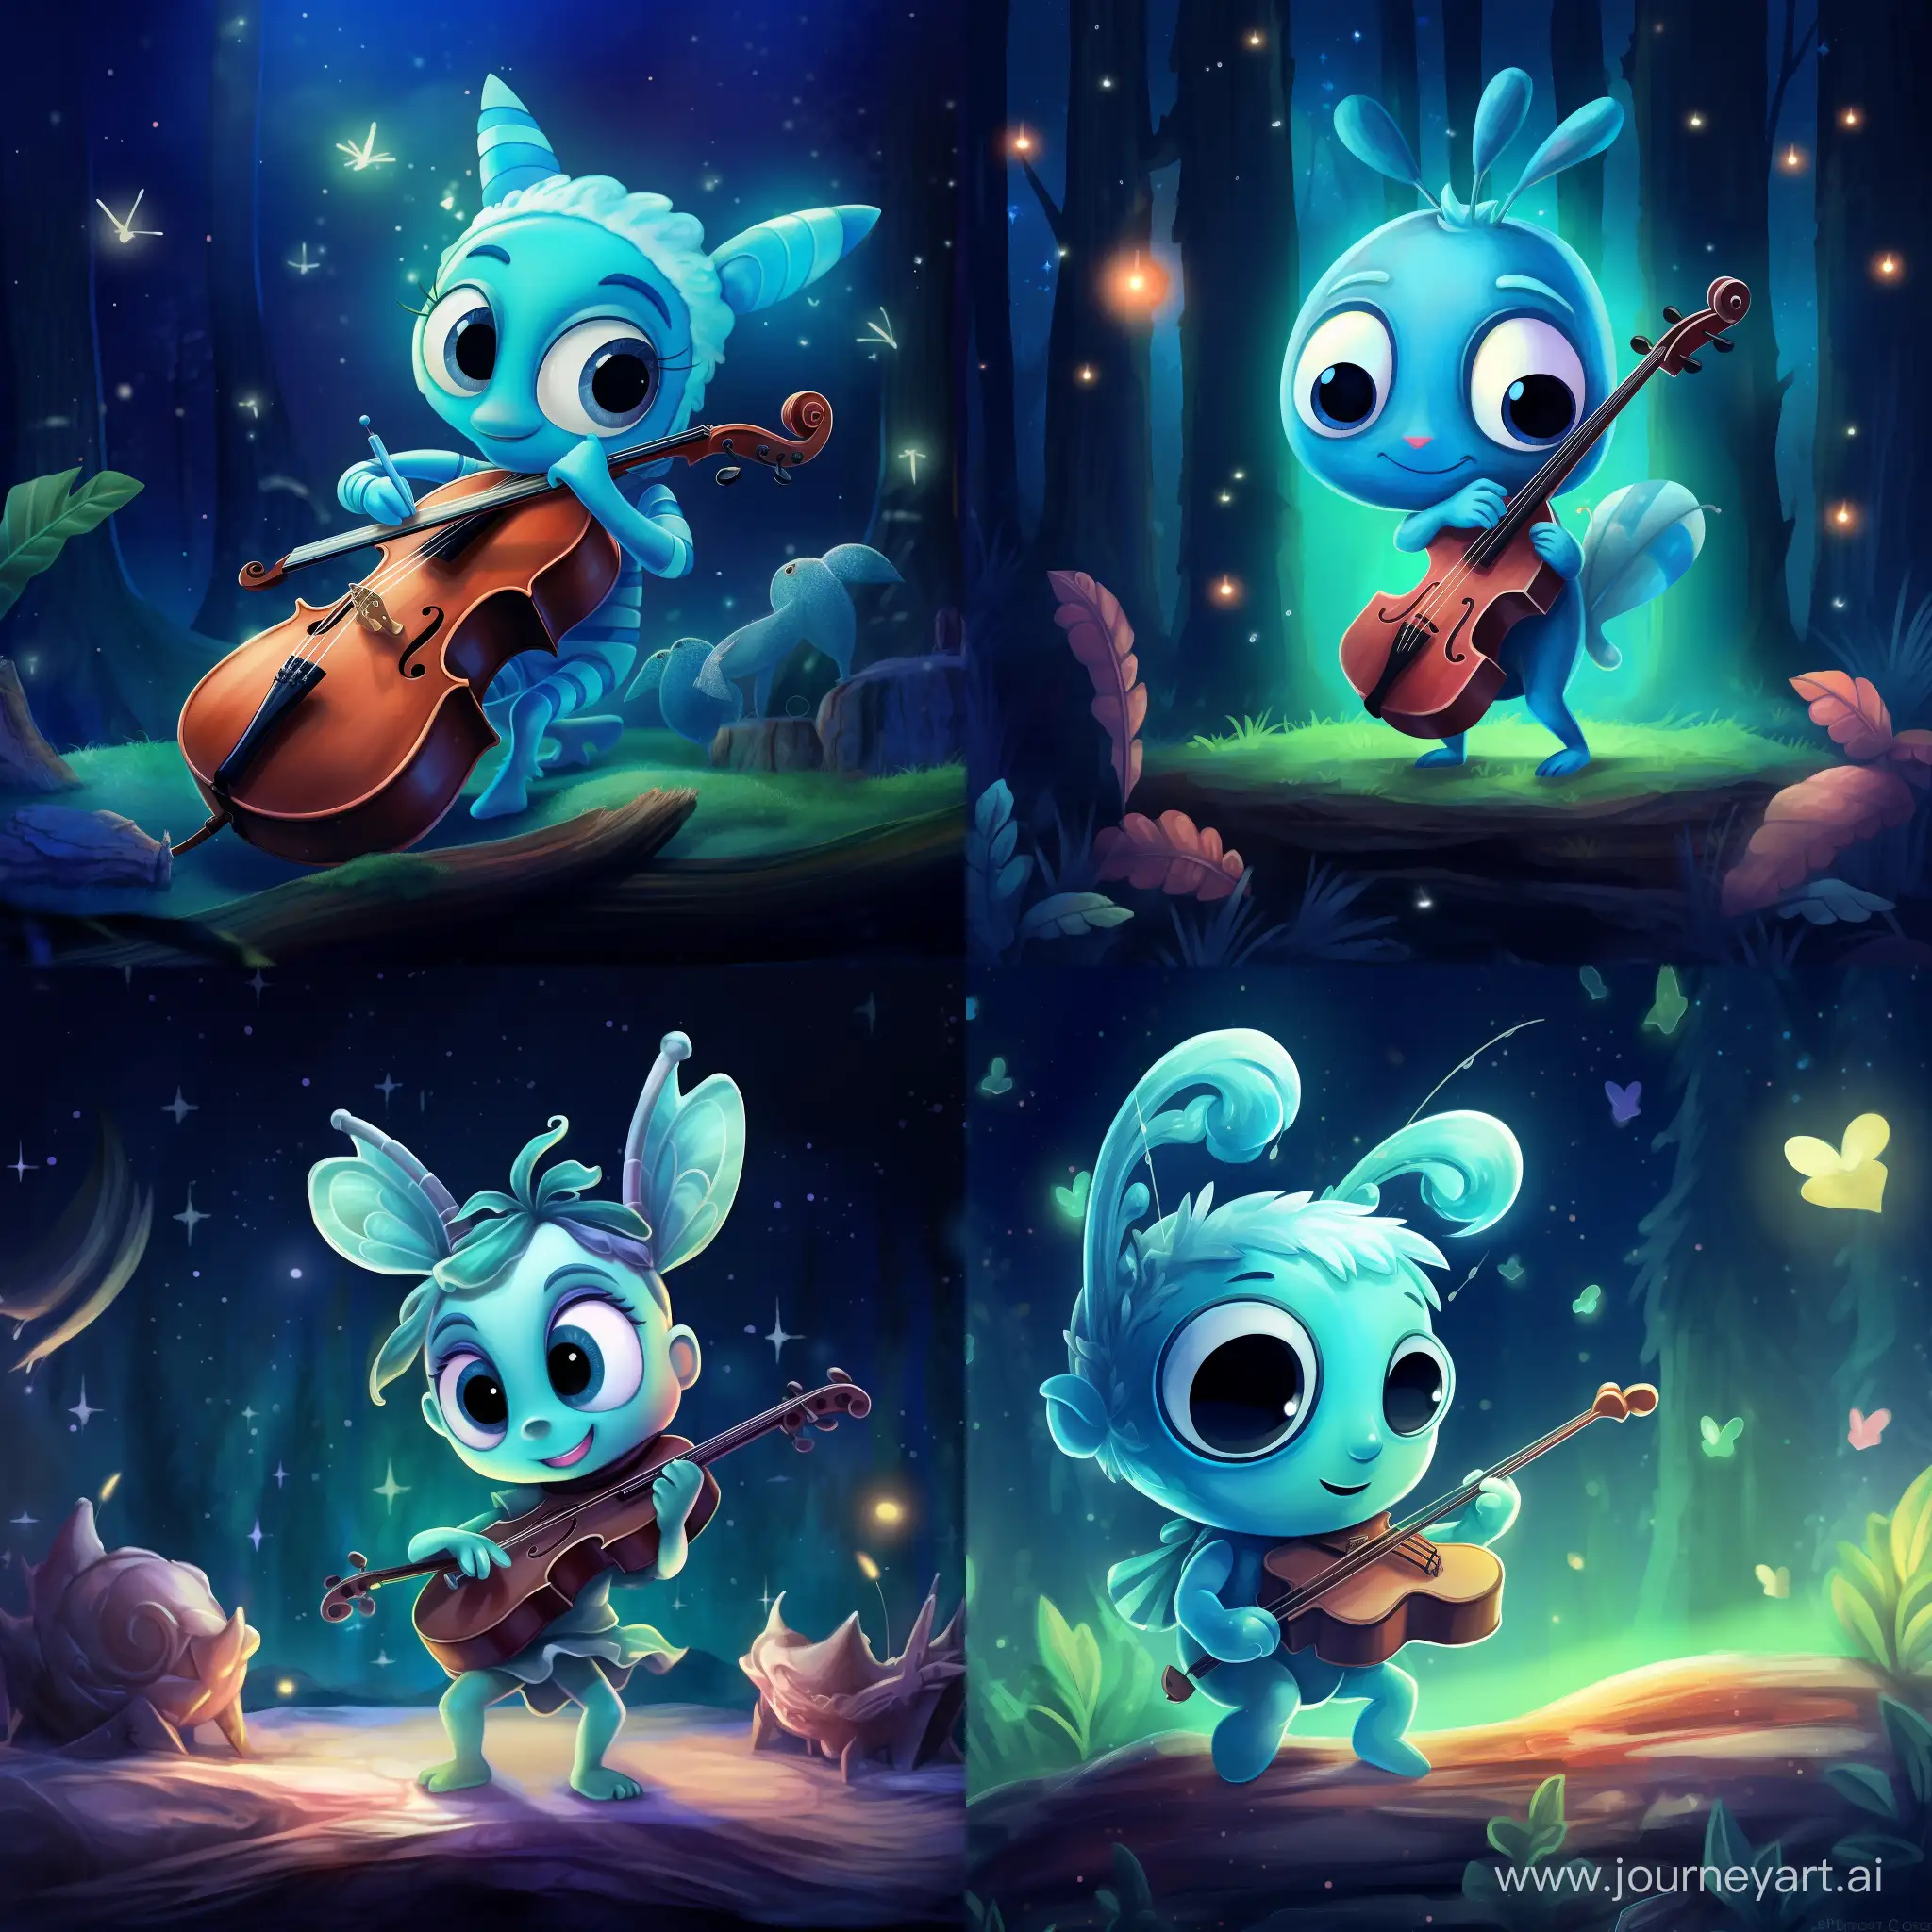 an illustration of a cute cricket close-up playing a violin and making music under the stars. The scene is magical with dappled light. Colors are blue and turquoise, in cartoon style